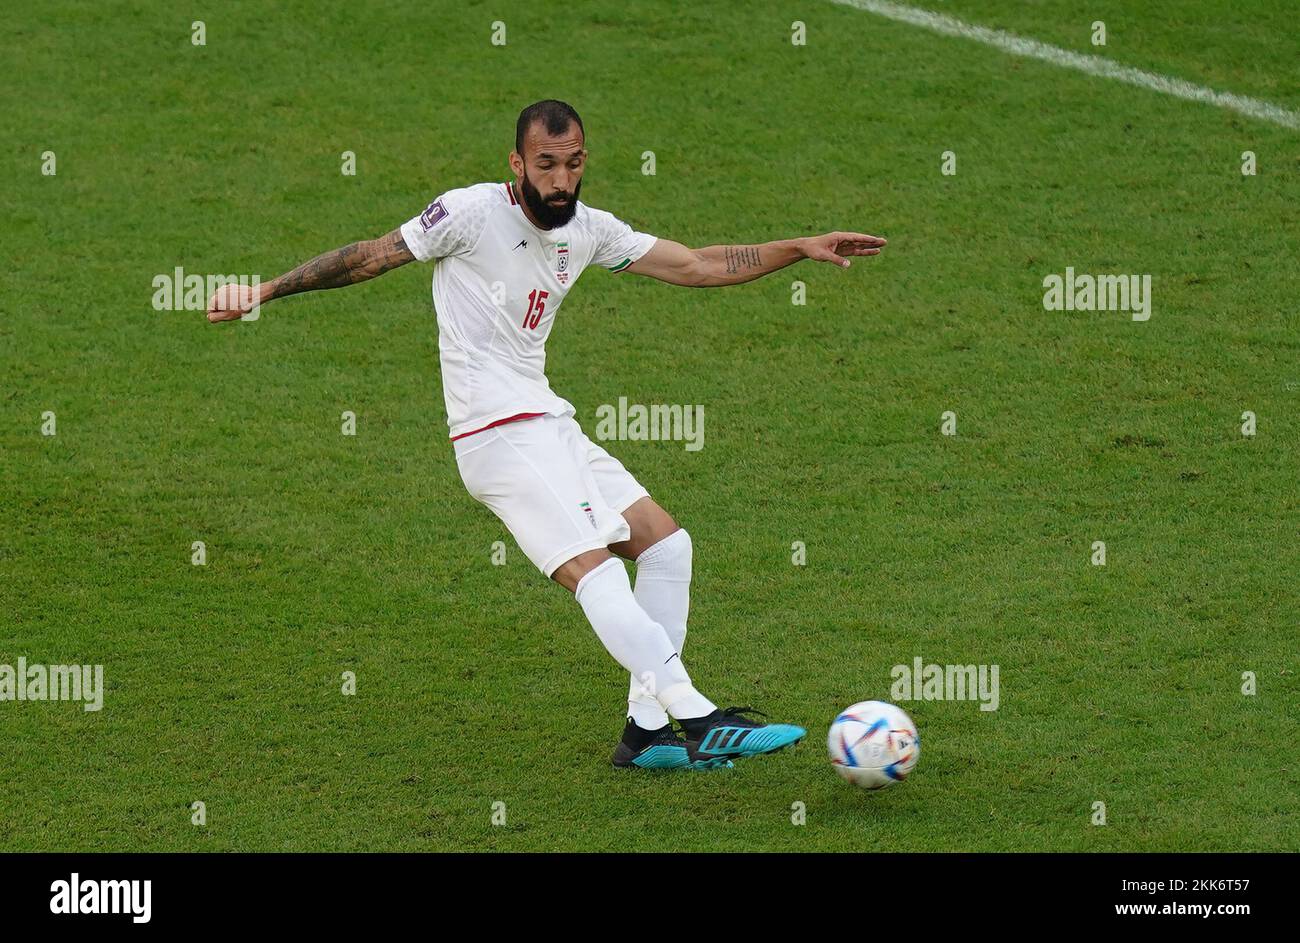 Iran's Roozbeh Cheshmi scores the opening goal during the FIFA World Cup Group B match at the Ahmad Bin Ali Stadium, Al-Rayyan. Picture date: Friday November 25, 2022. Stock Photo